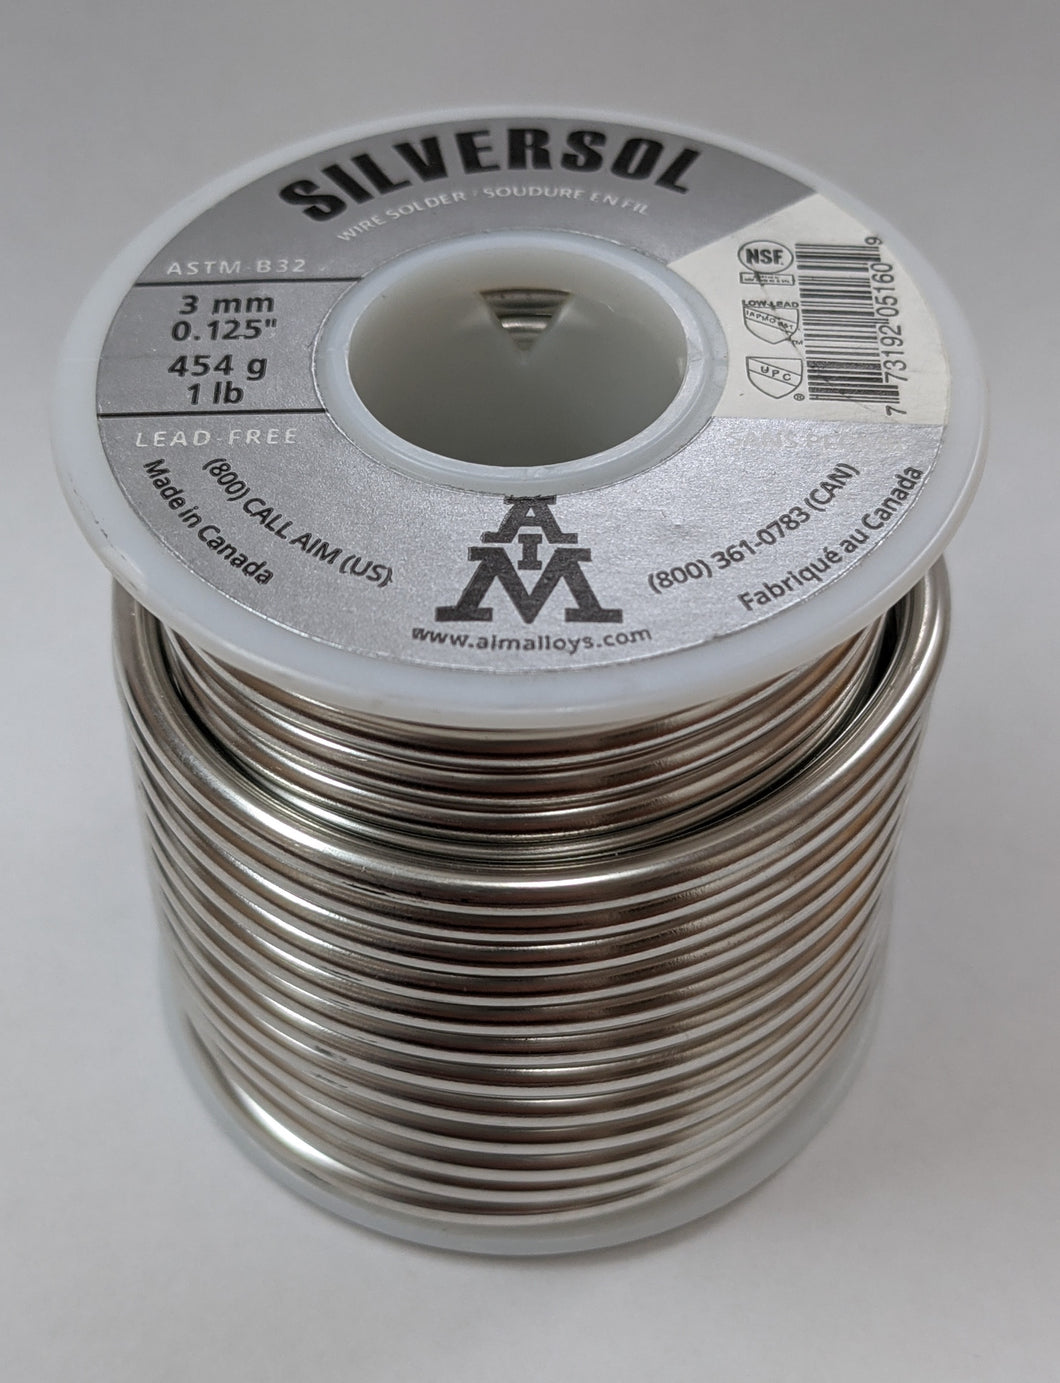 Solder wire for stained glass soldering work Canada